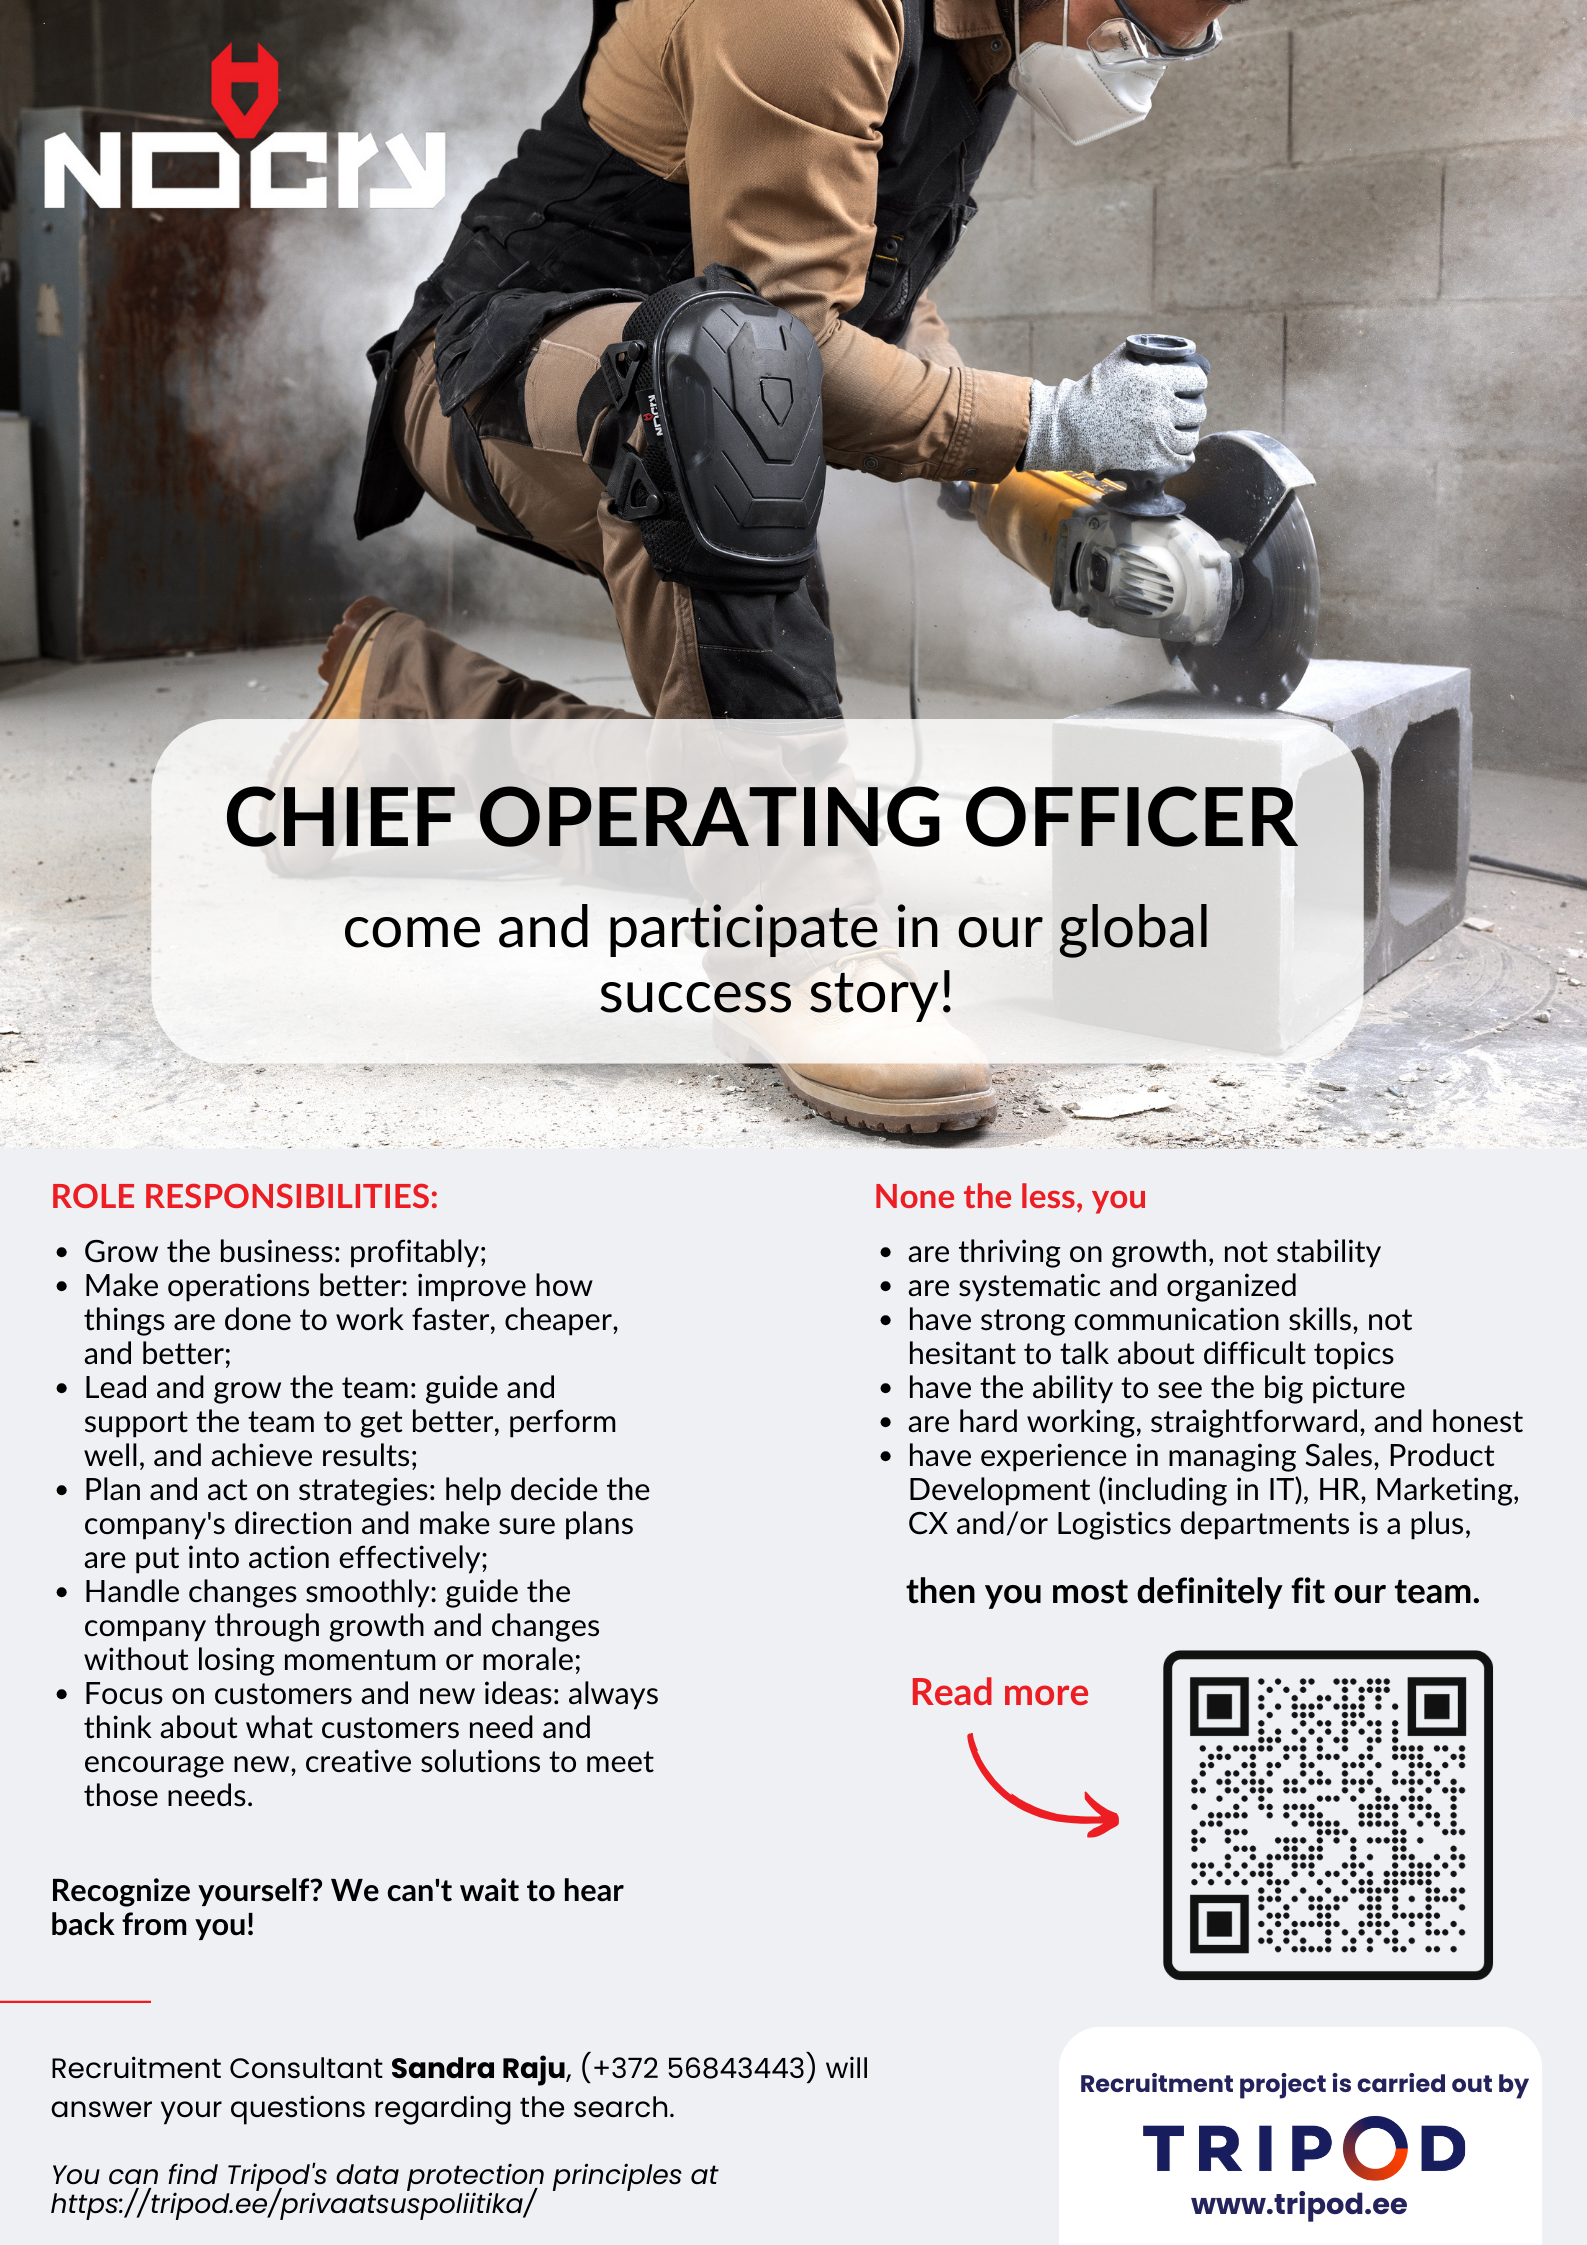 CHIEF OPERATING OFFICER